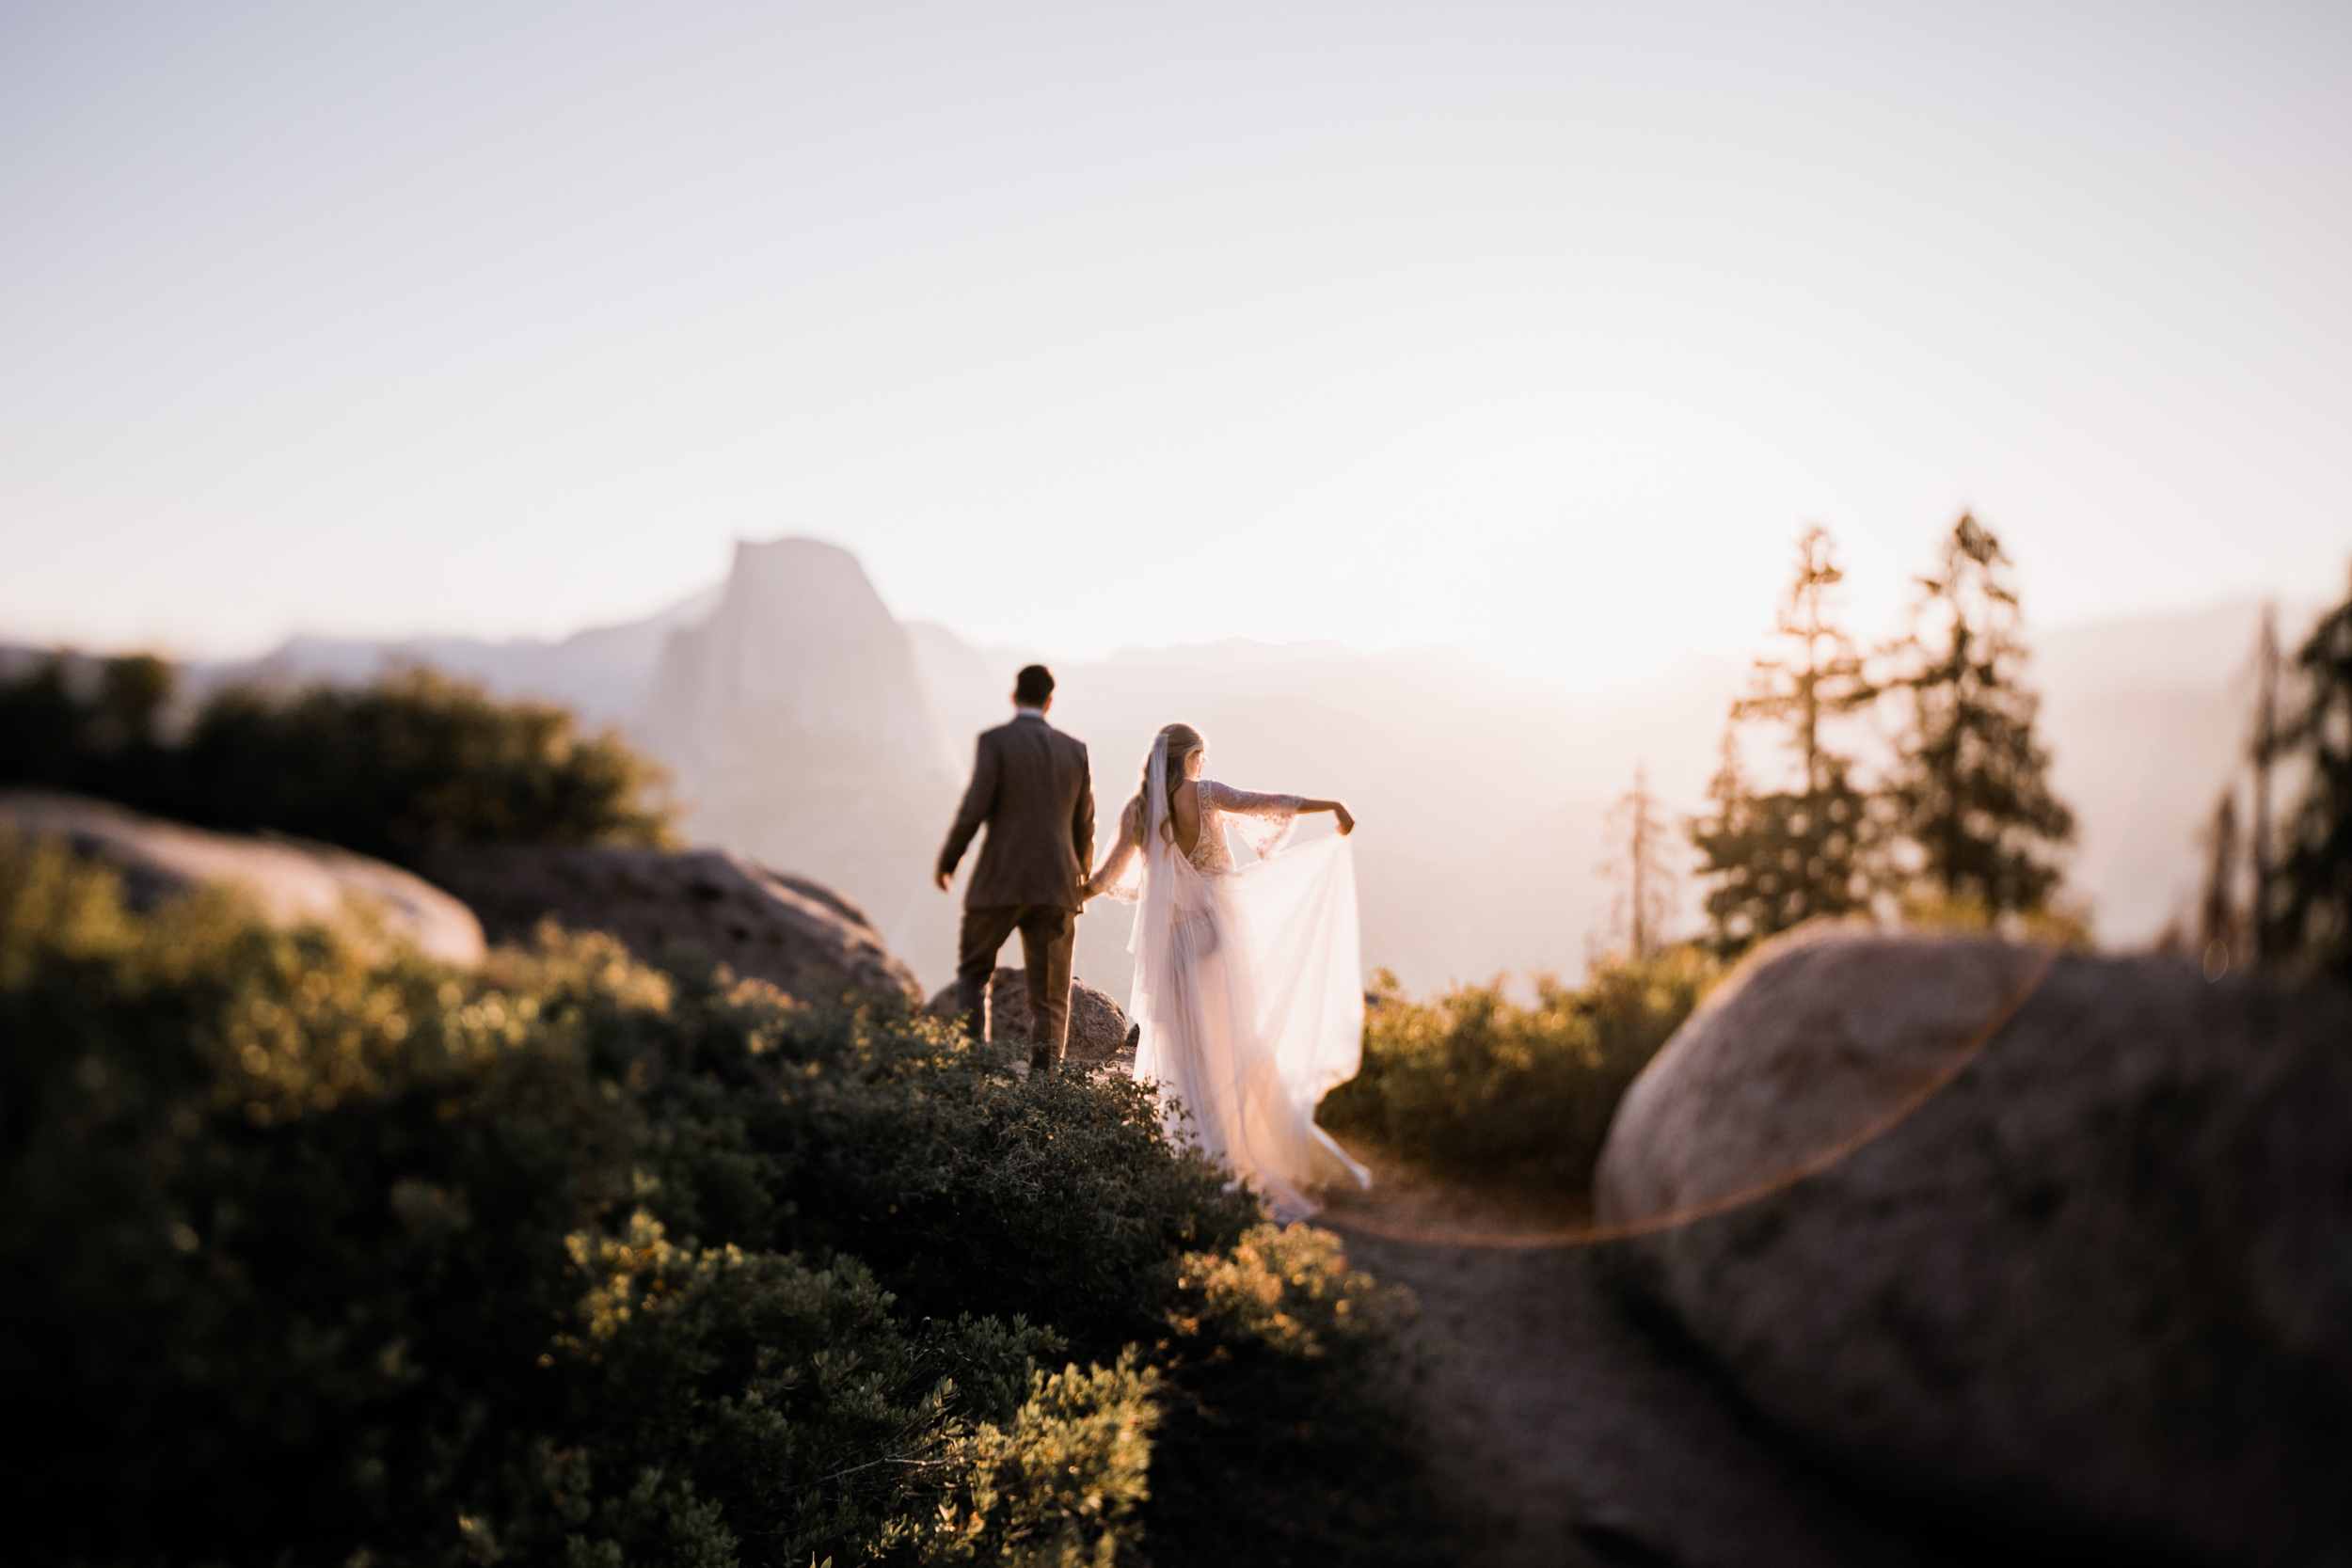 the hearnes adventure photography best of 2018 | Junebug Best of the Best Wedding Photographers | Adventure Elopement Photographer in Moab Utah, Yosemite National Park, and Alaska